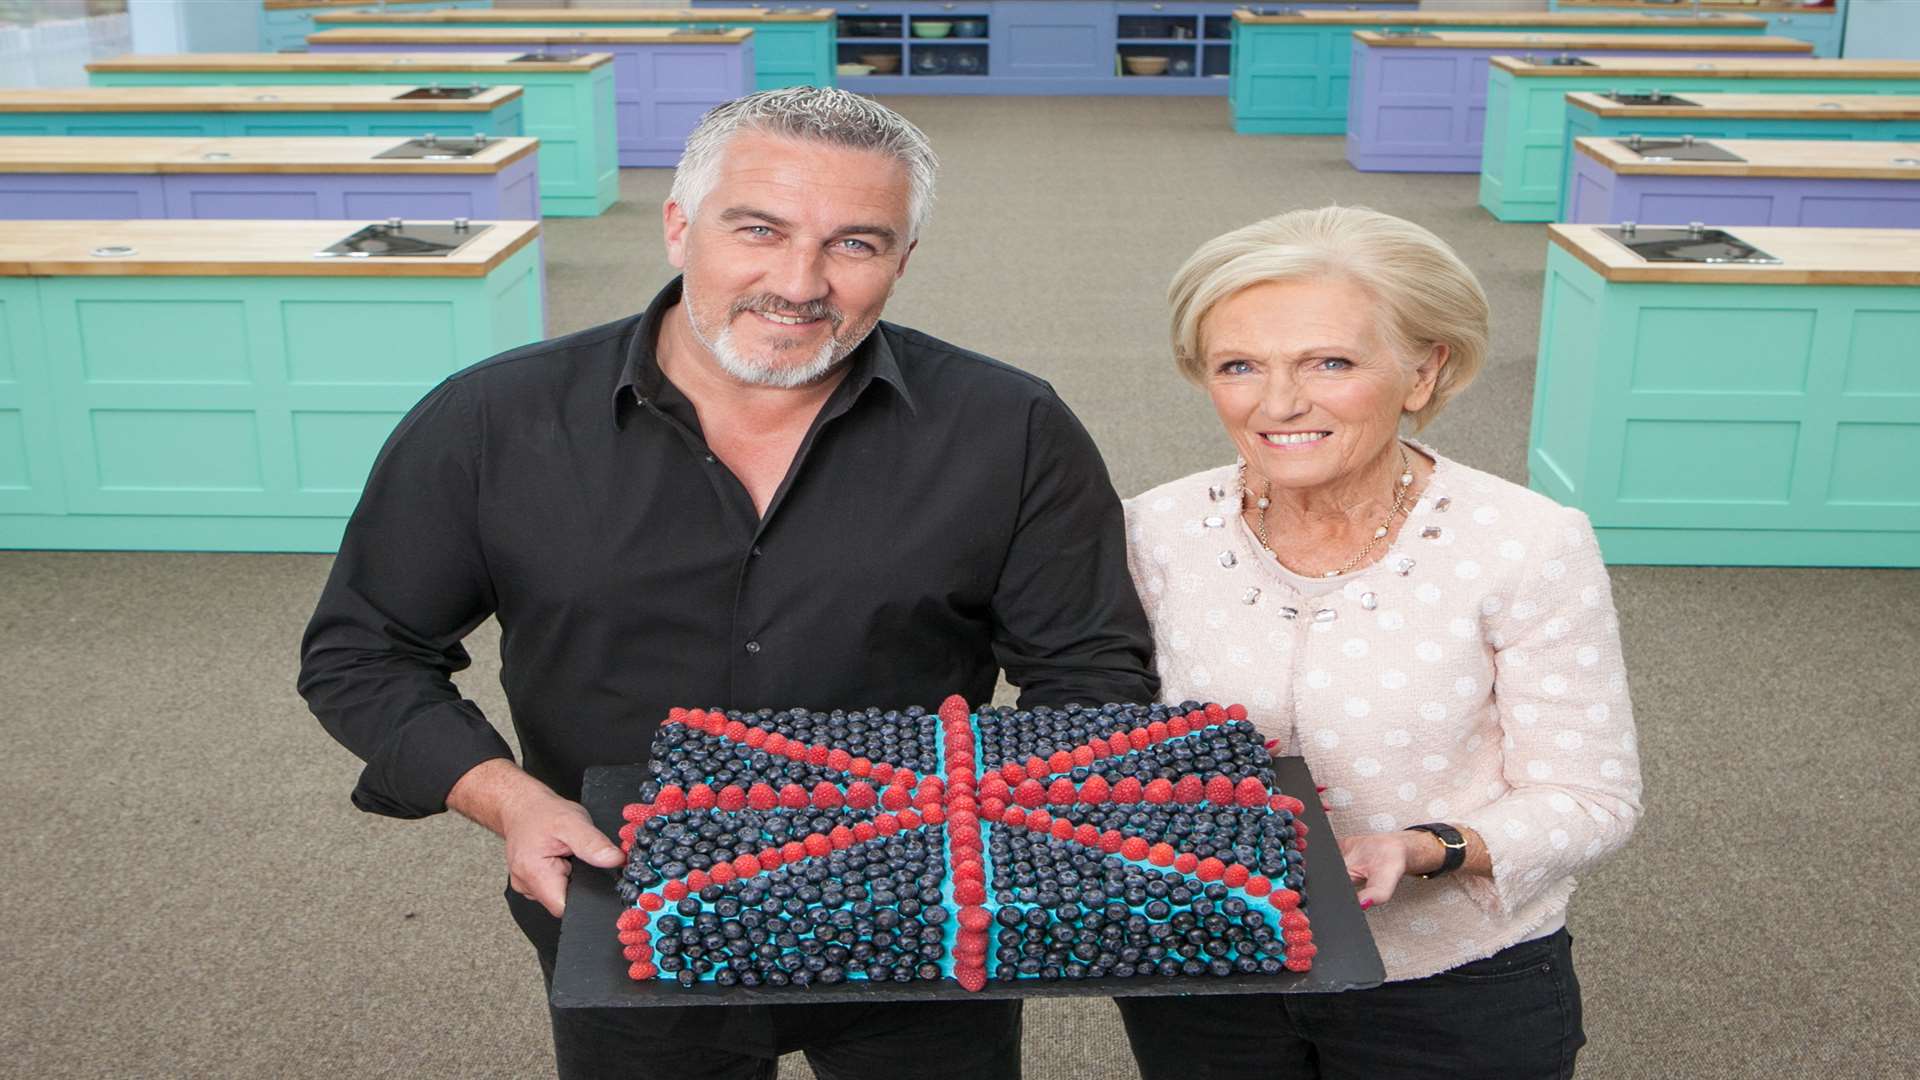 Paul Hollywood with fellow Bake Off judge Mary Berry. Picture: PA Photo/BBC/Mark Bourdillon.